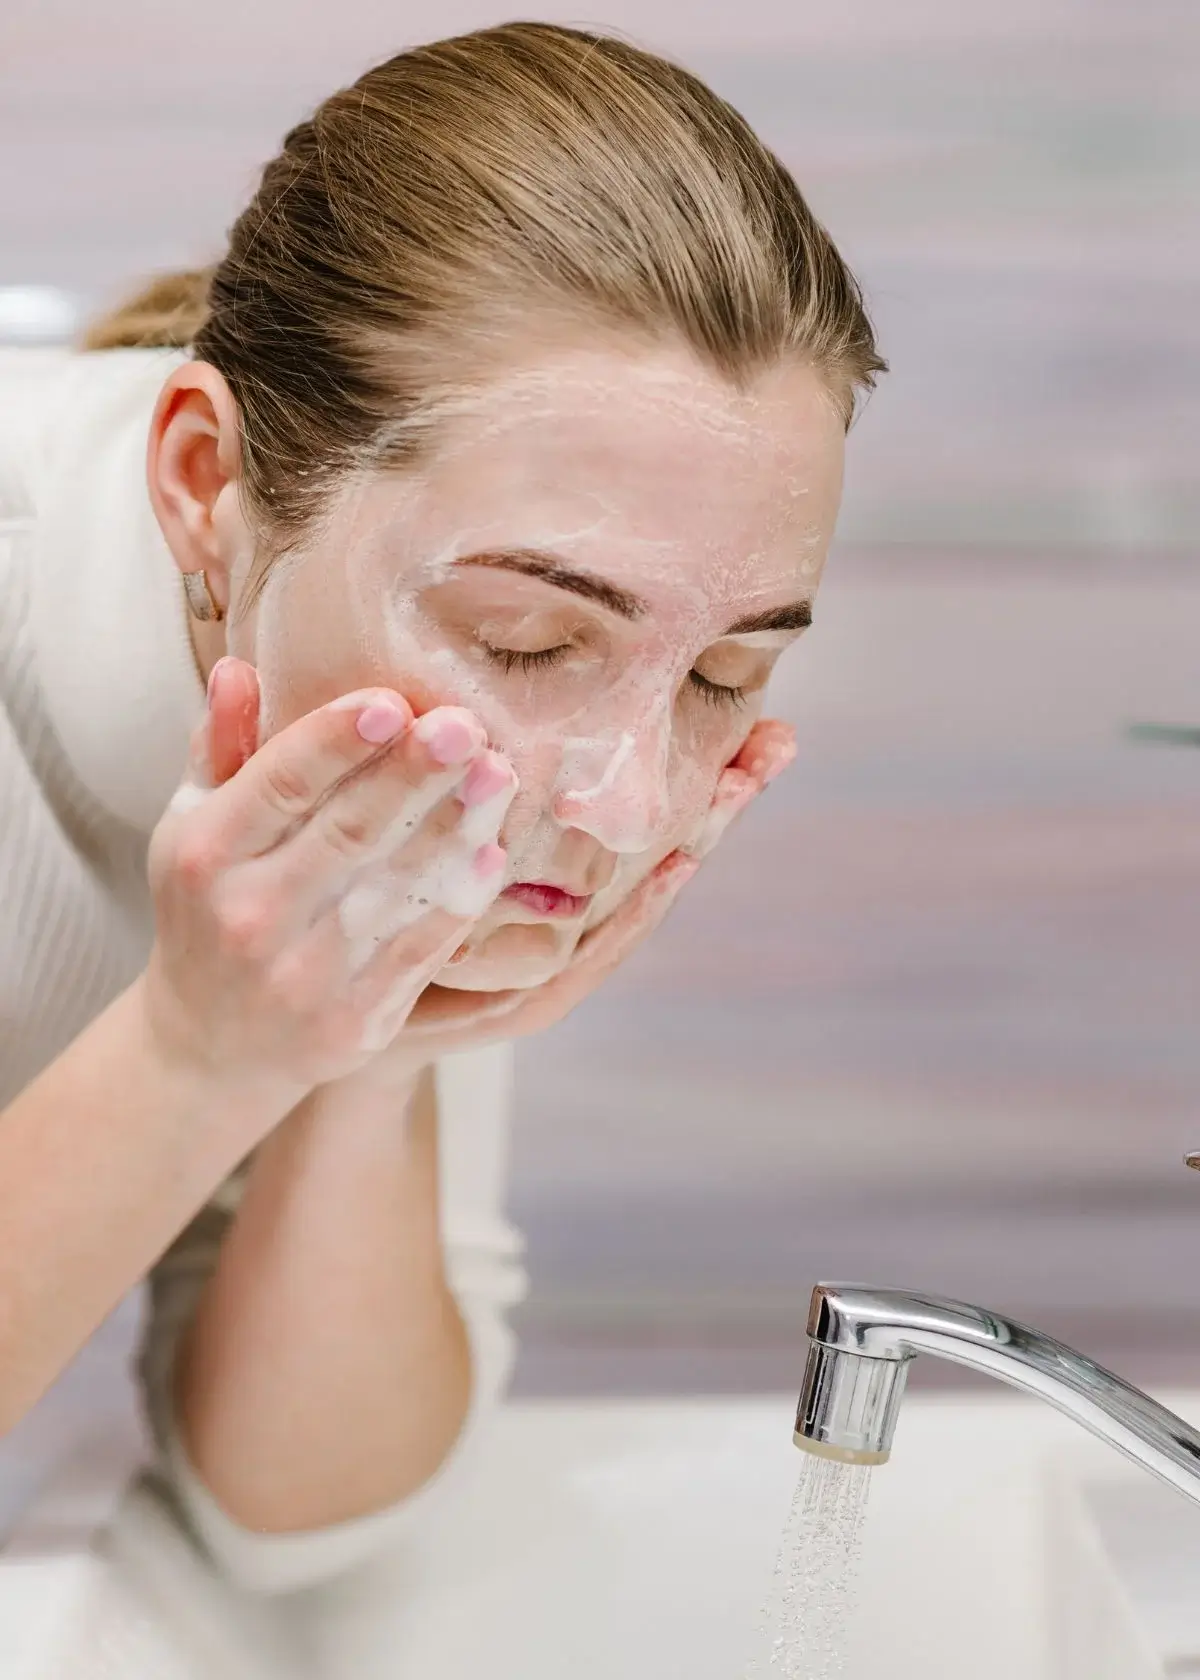 How to choose the right salicylic acid face wash?